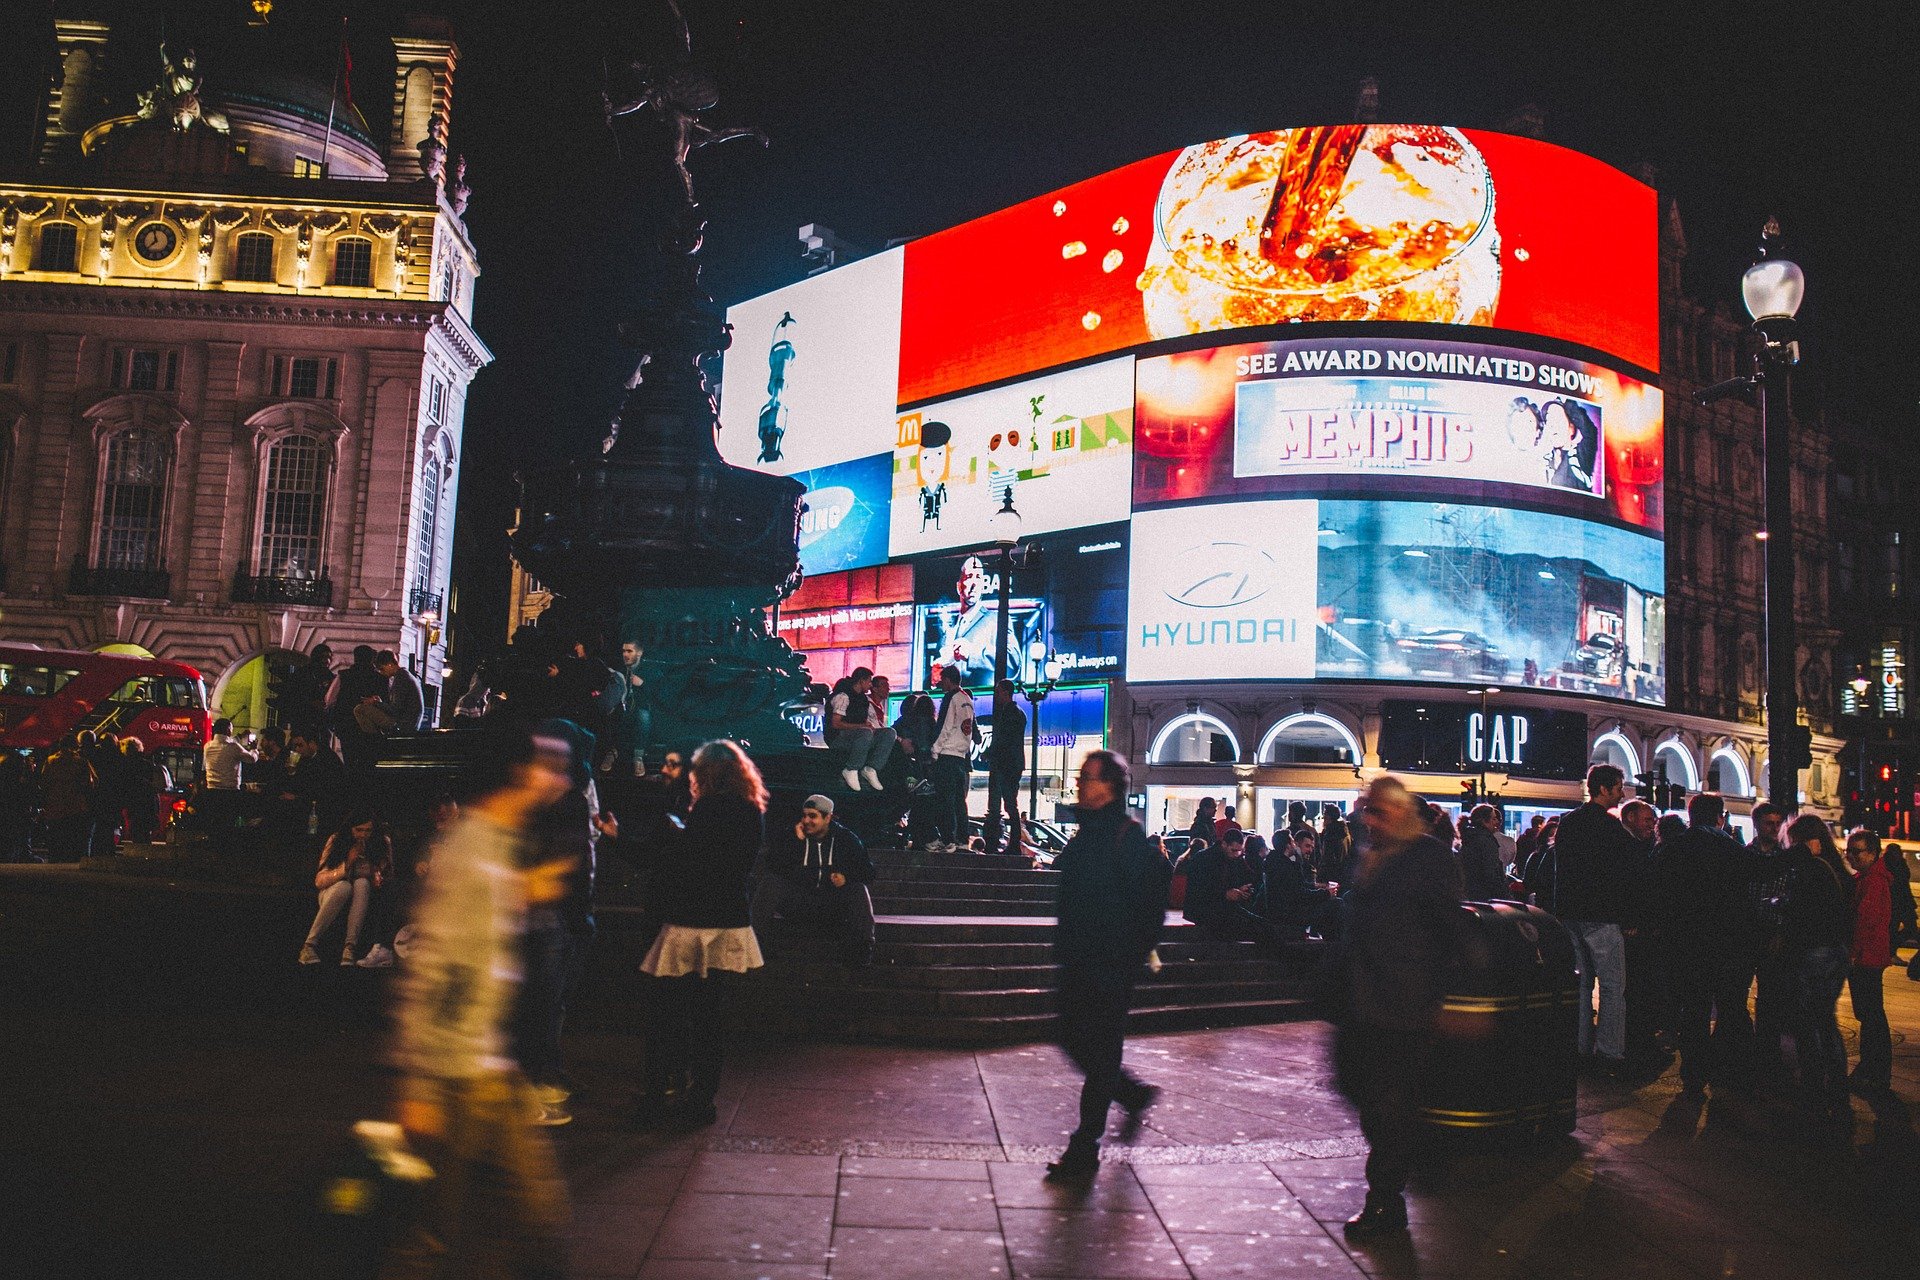 Piccadilly Circus - London Nightlife